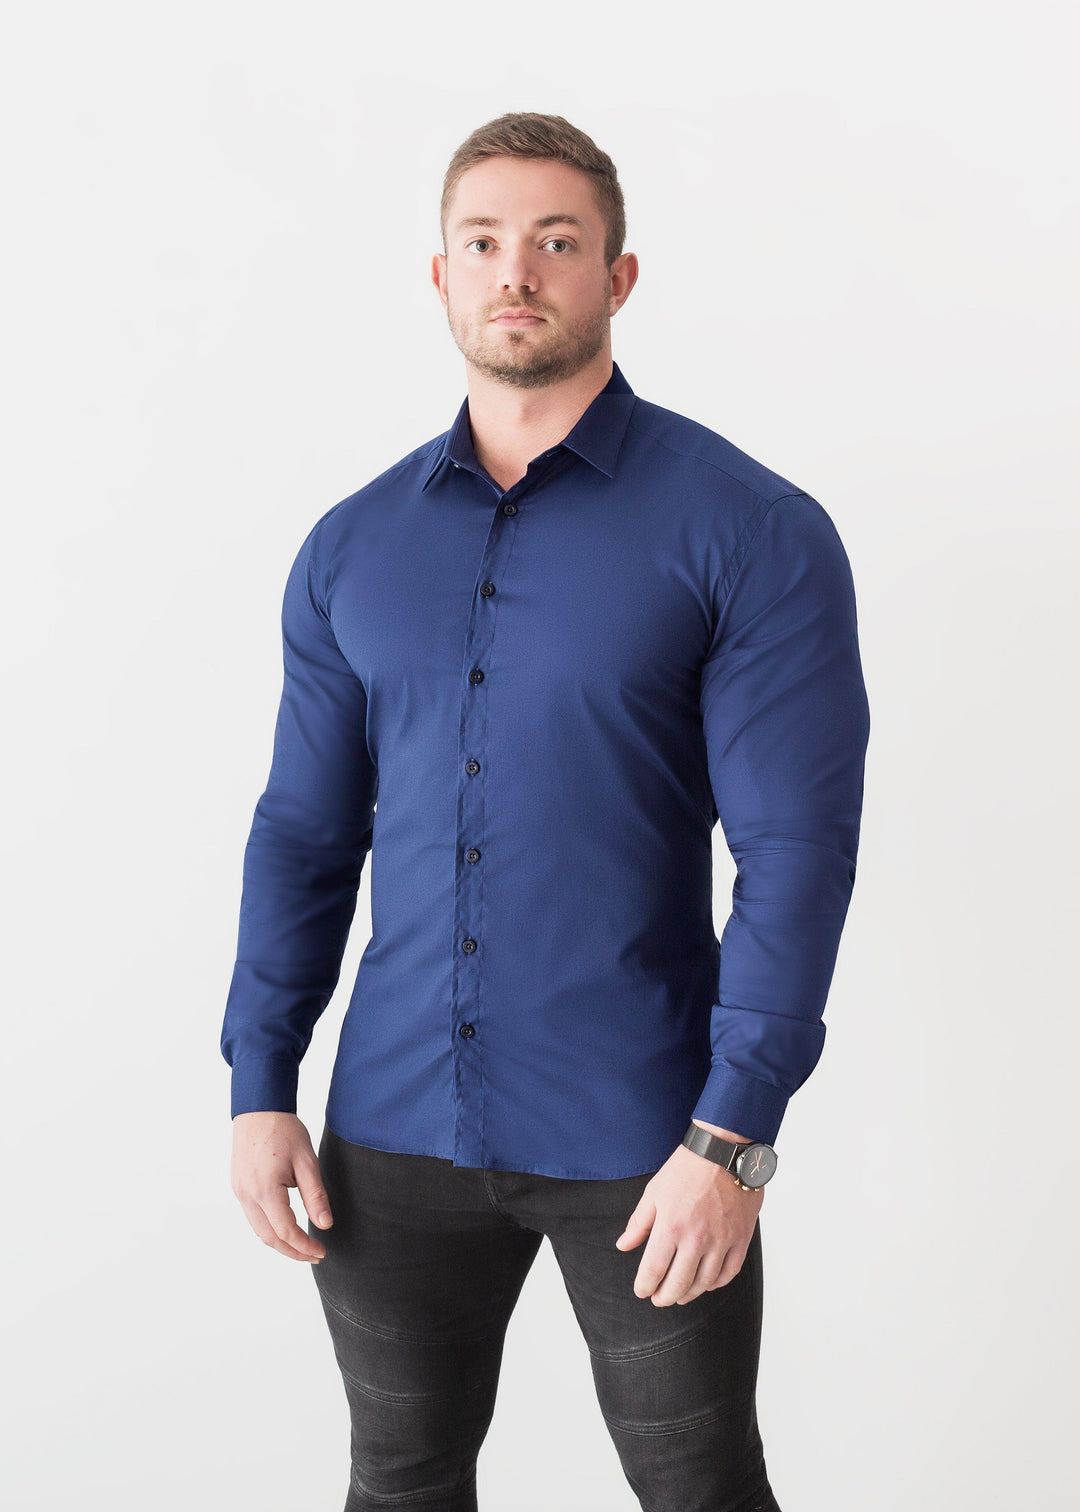 Navy Blue Tapered Fit Shirt. A Proportionally Fitted and Comfortable Muscle Fit Shirt. The Best Shirts For a Muscular Build.